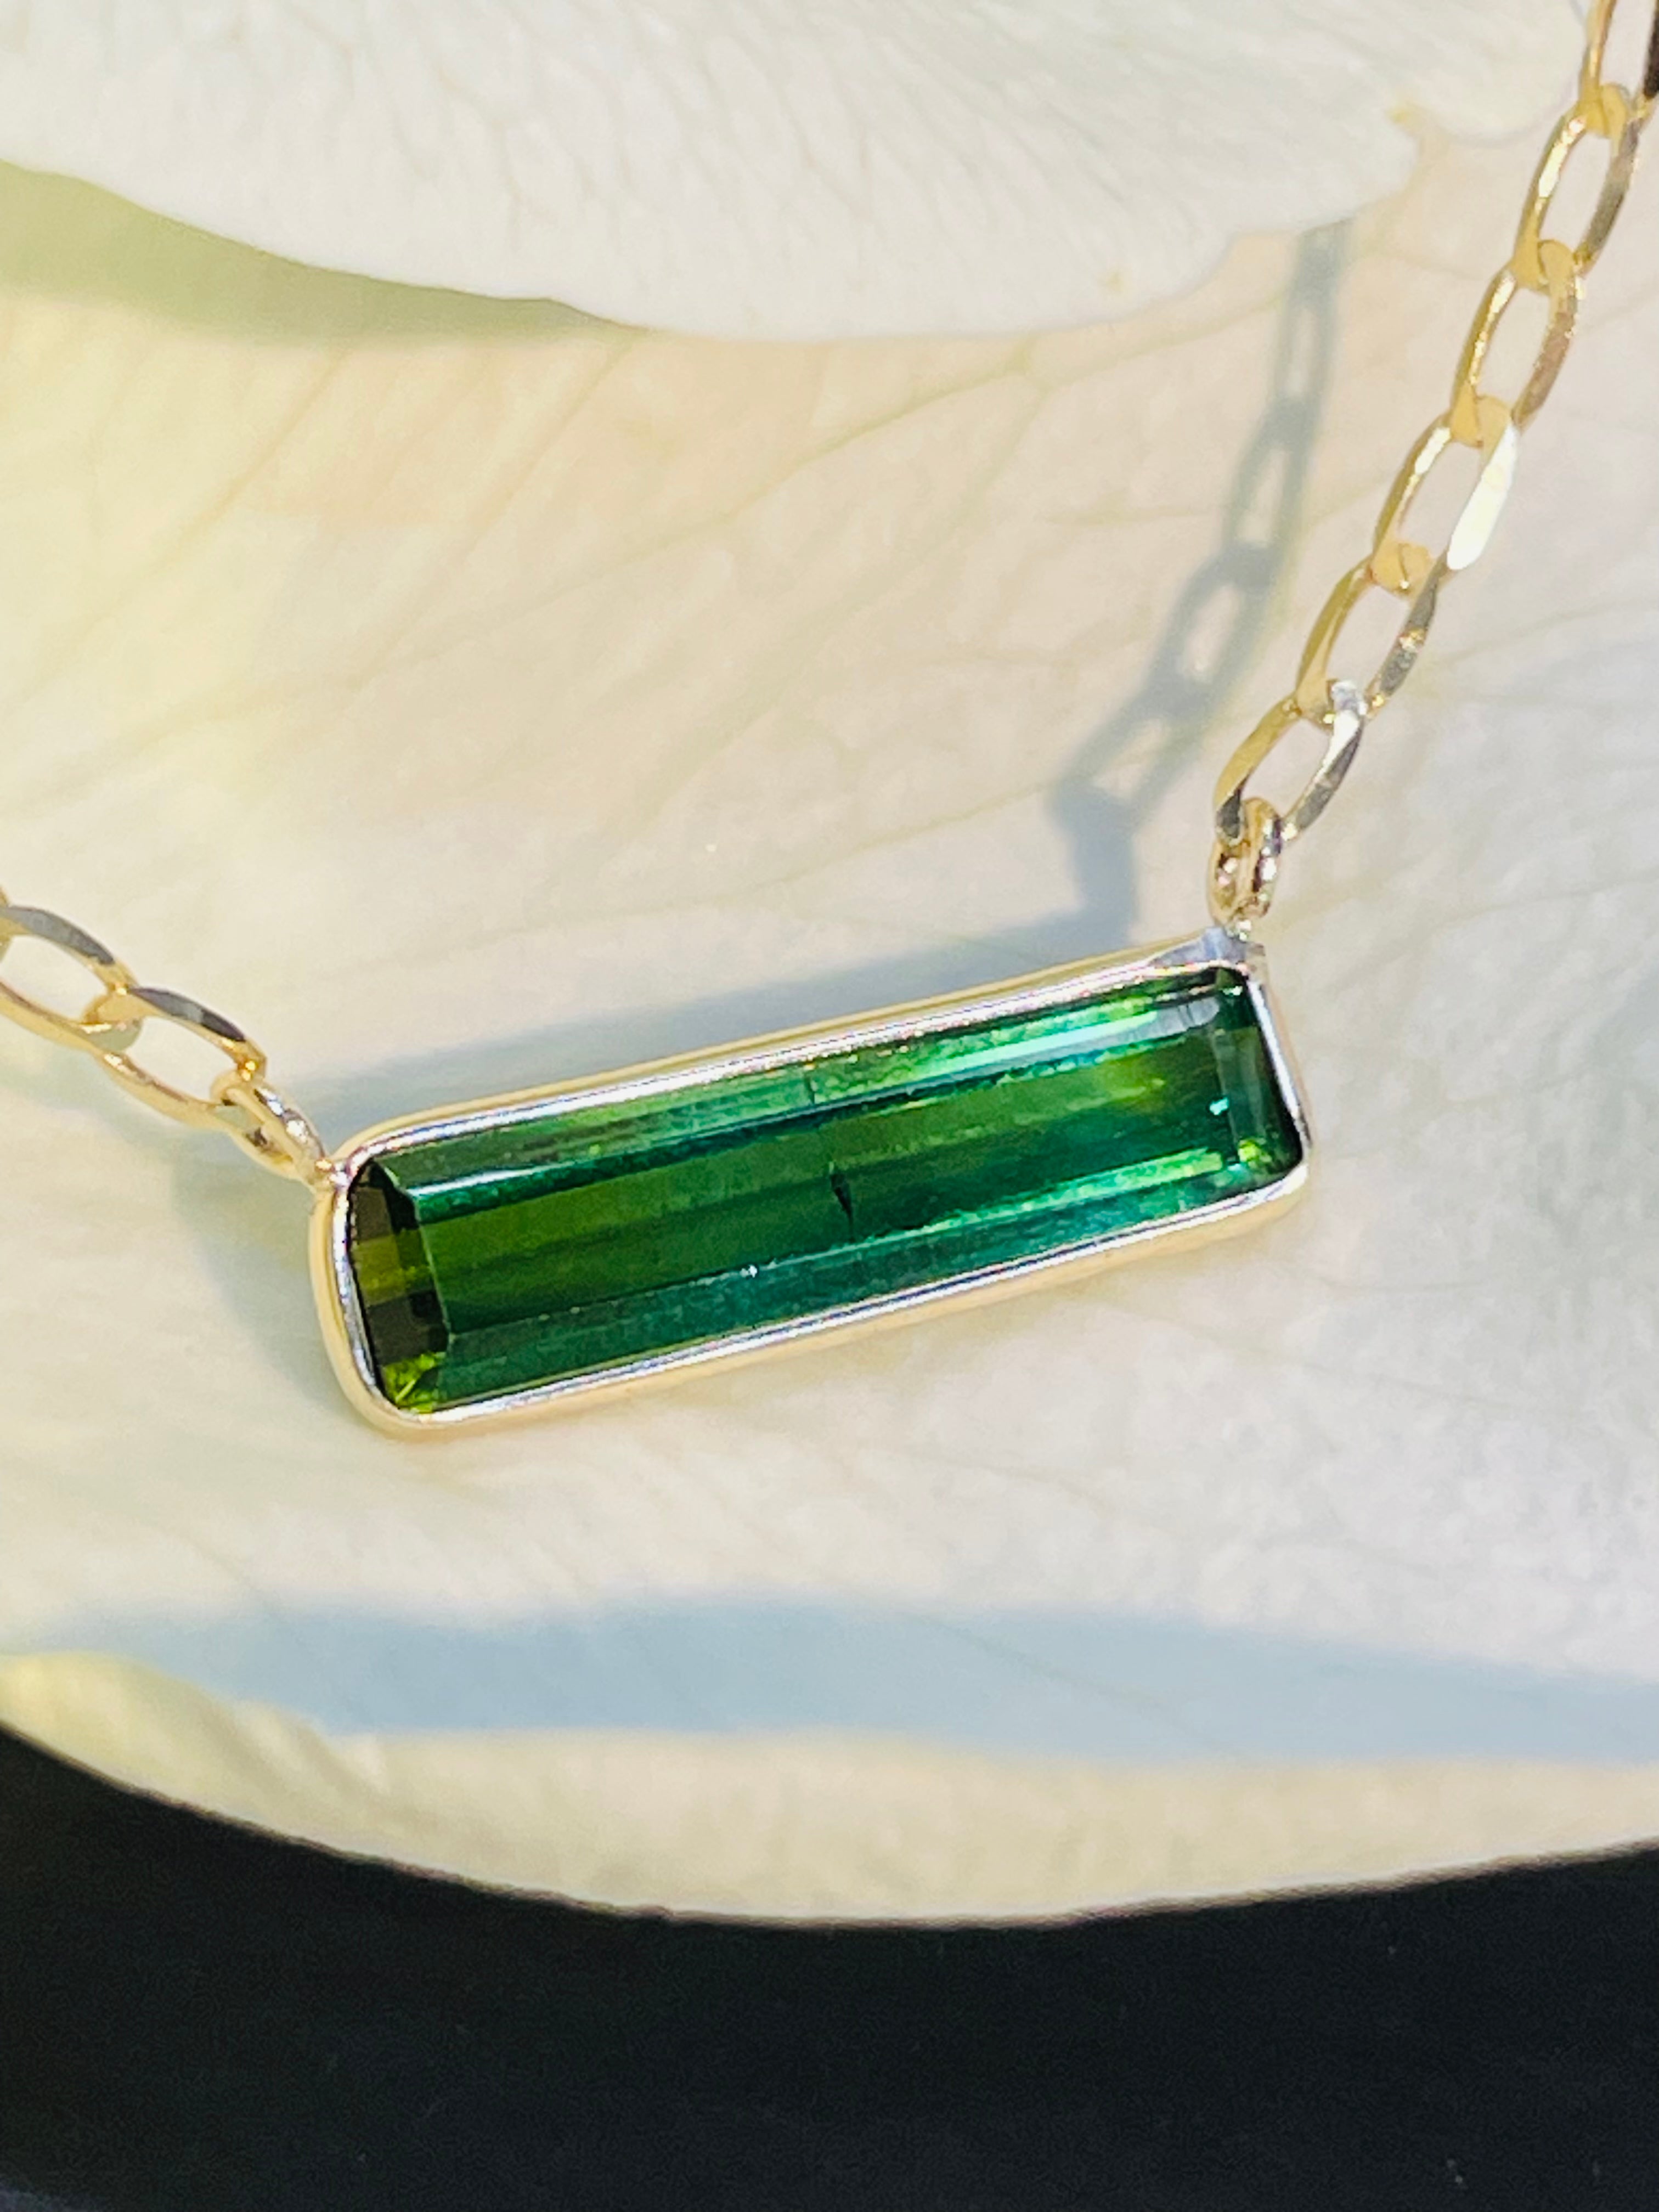 2CT Green Tourmaline and Solid 14K Yellow Gold Curb Link Chain Necklace 16"